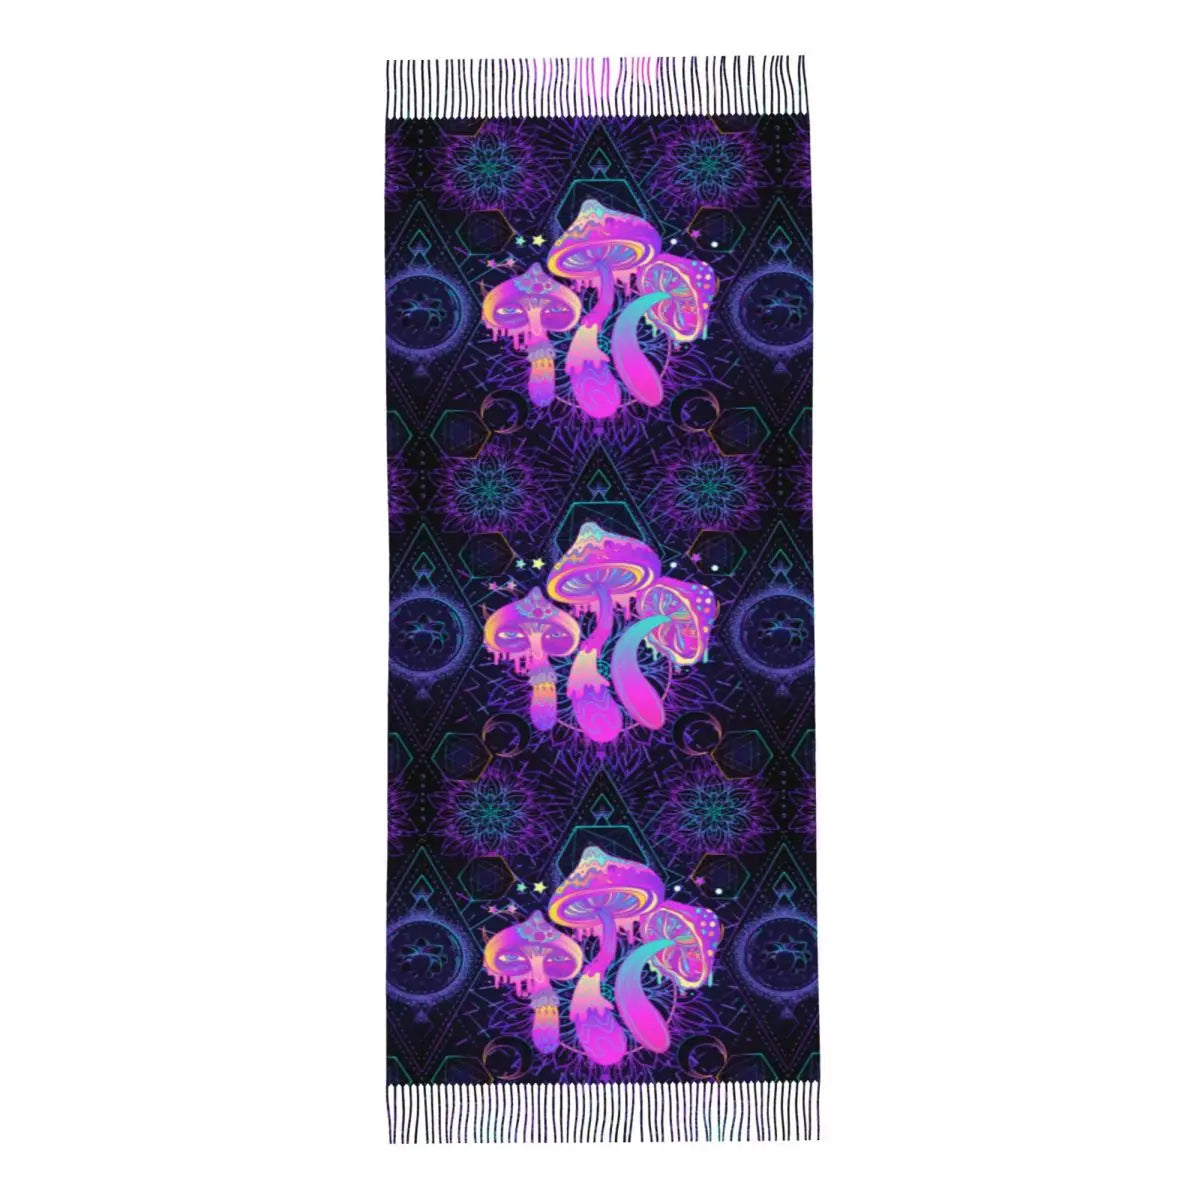 Psychedelic Shrooms Scarf for Womens Winter Warm Pashmina Shawl Wrap Mushroom Abstract Trippy Long Large Shawl Scarf Ladies